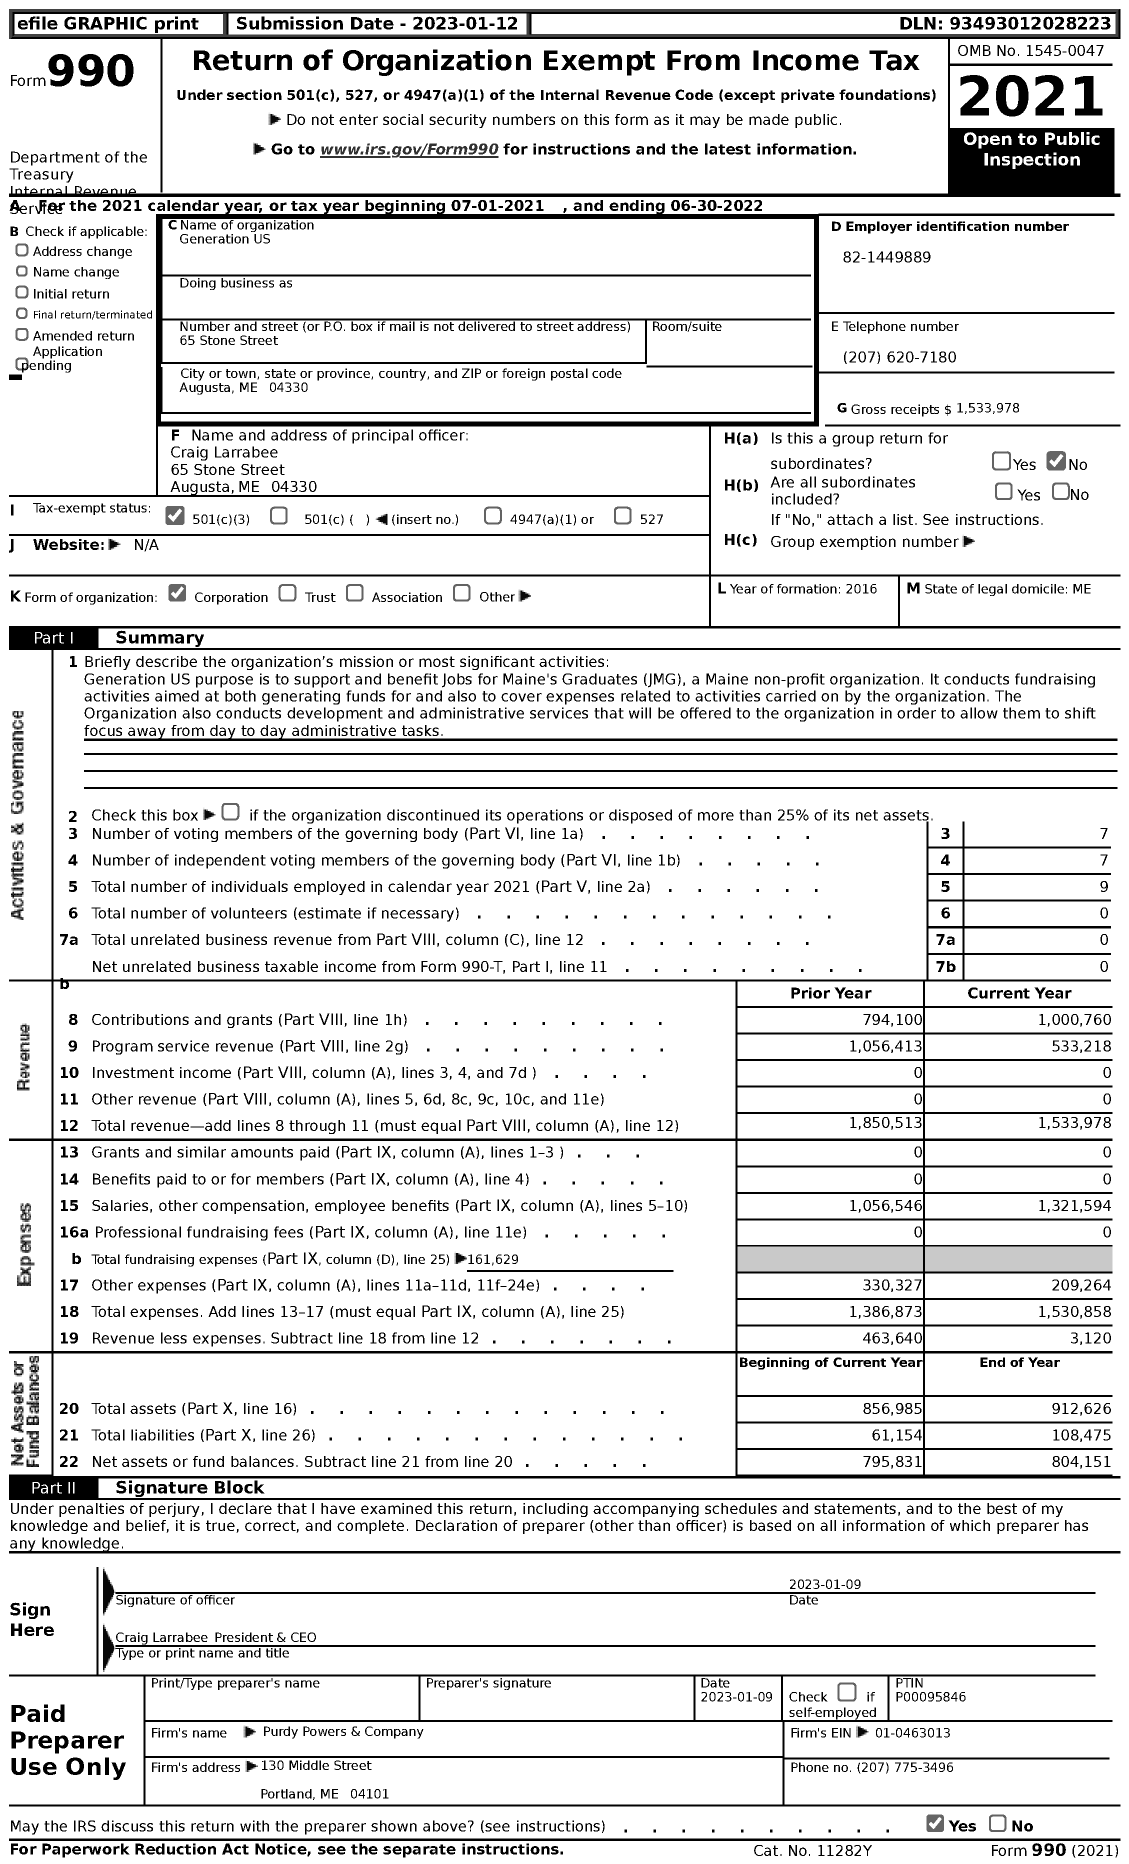 Image of first page of 2021 Form 990 for Generation US